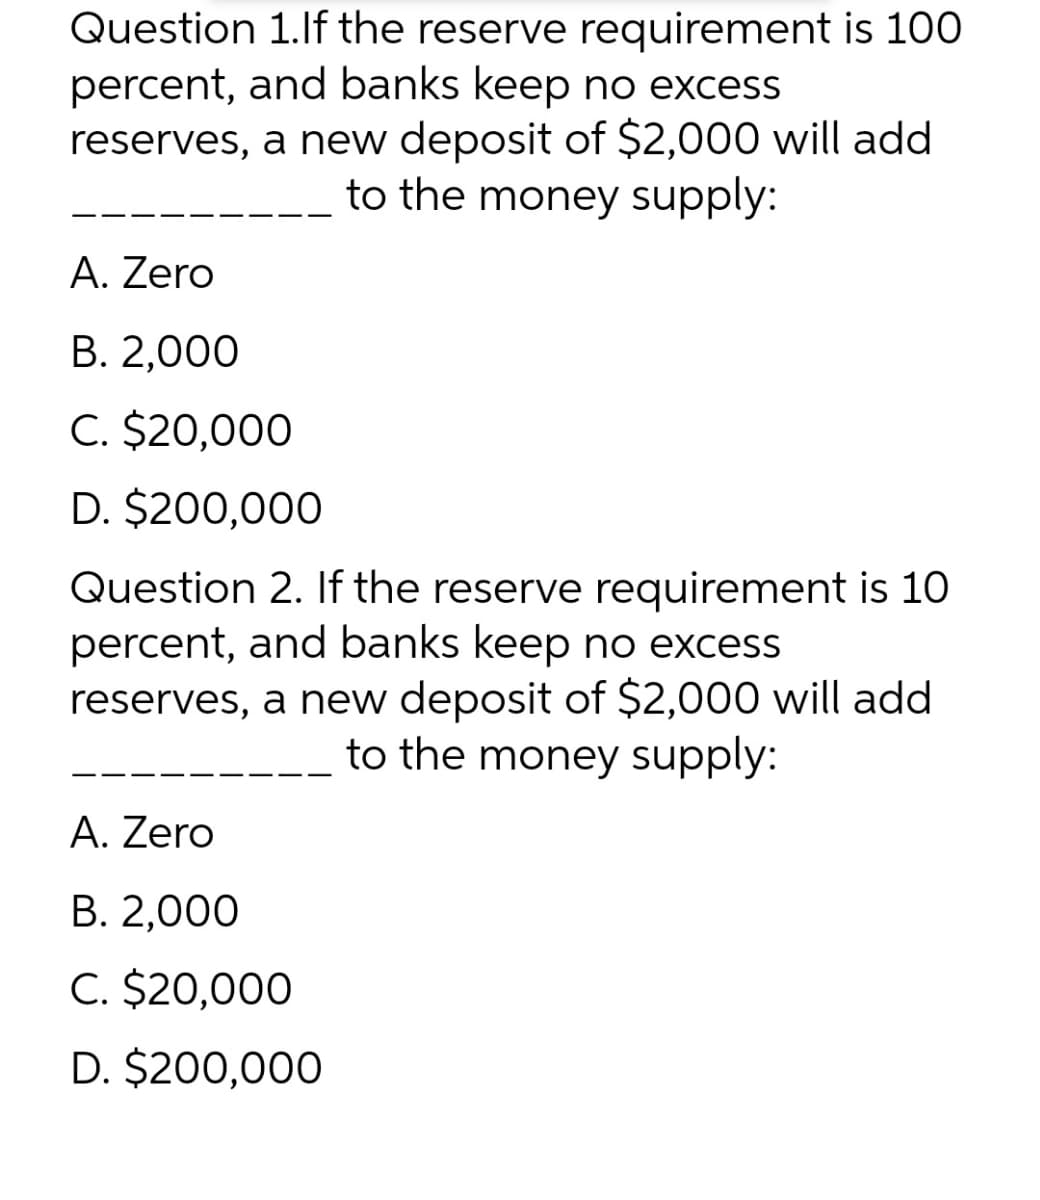 Question 1.lf the reserve requirement is 100
percent, and banks keep no excess
reserves, a new deposit of $2,000 will add
to the money supply:
A. Zero
В. 2,000
C. $20,000
D. $200,000
Question 2. If the reserve requirement is 10
percent, and banks keep no excess
reserves, a new deposit of $2,000 will add
to the money supply:
A. Zero
В. 2,000
C. $20,000
D. $200,000
